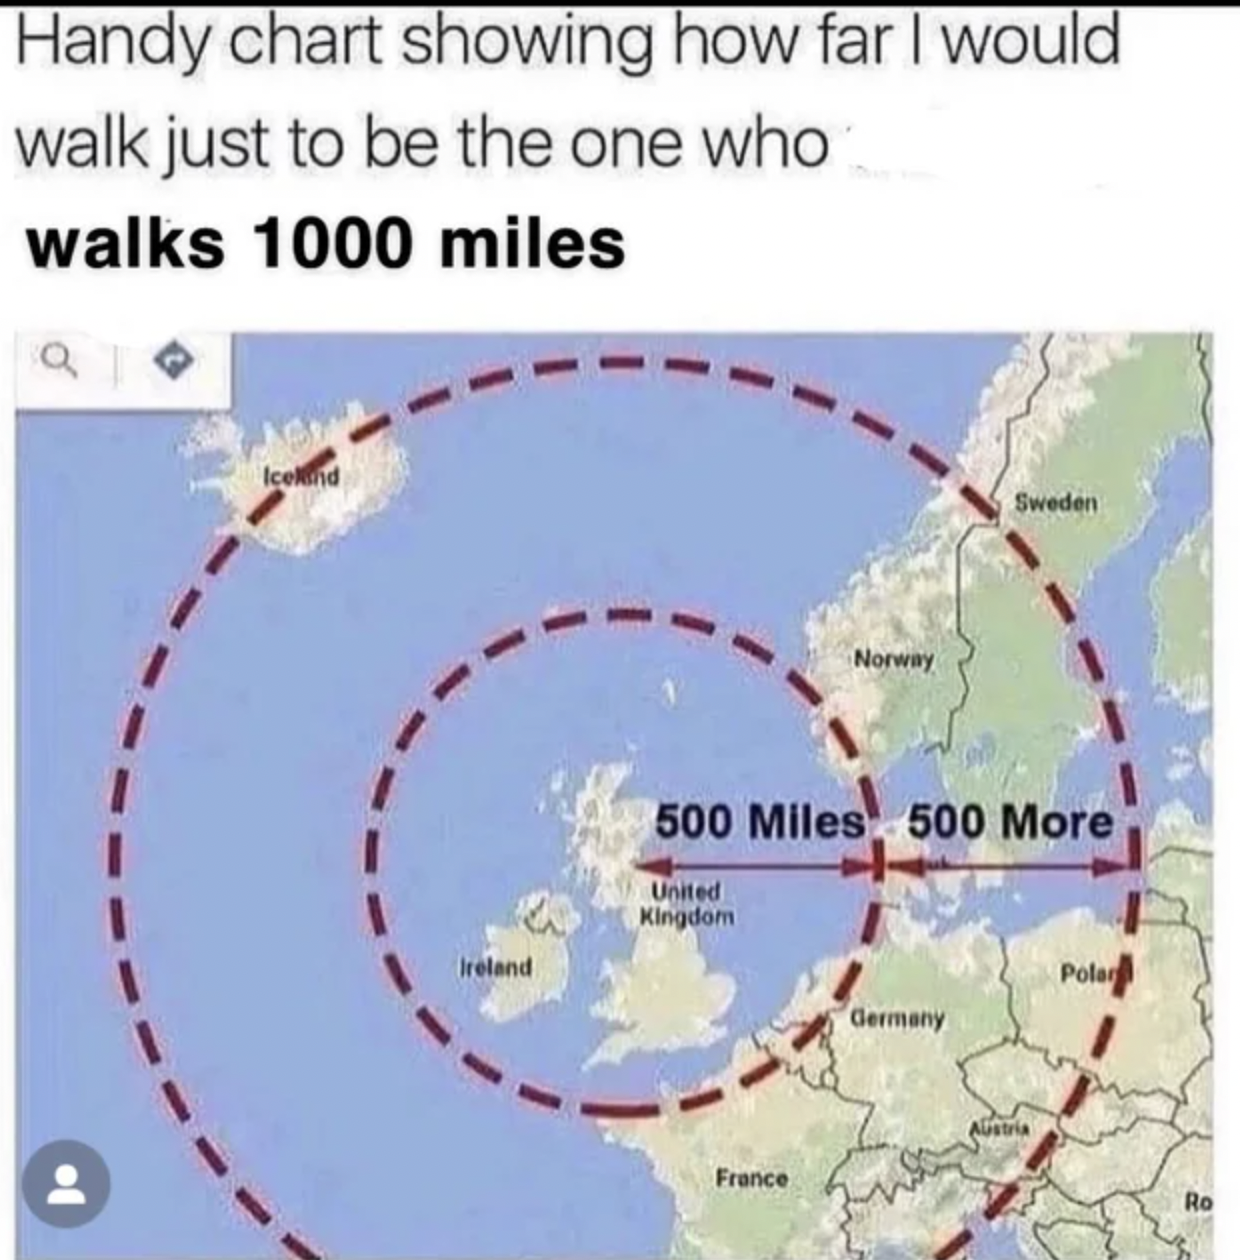 Memes that tell the truth - far the proclaimers would walk - Handy chart showing how far I would walk just to be the one who walks 1000 miles a I Ireland Norway France 500 Miles 500 More United Kingdom Sweden Germany Austria Polar Ro